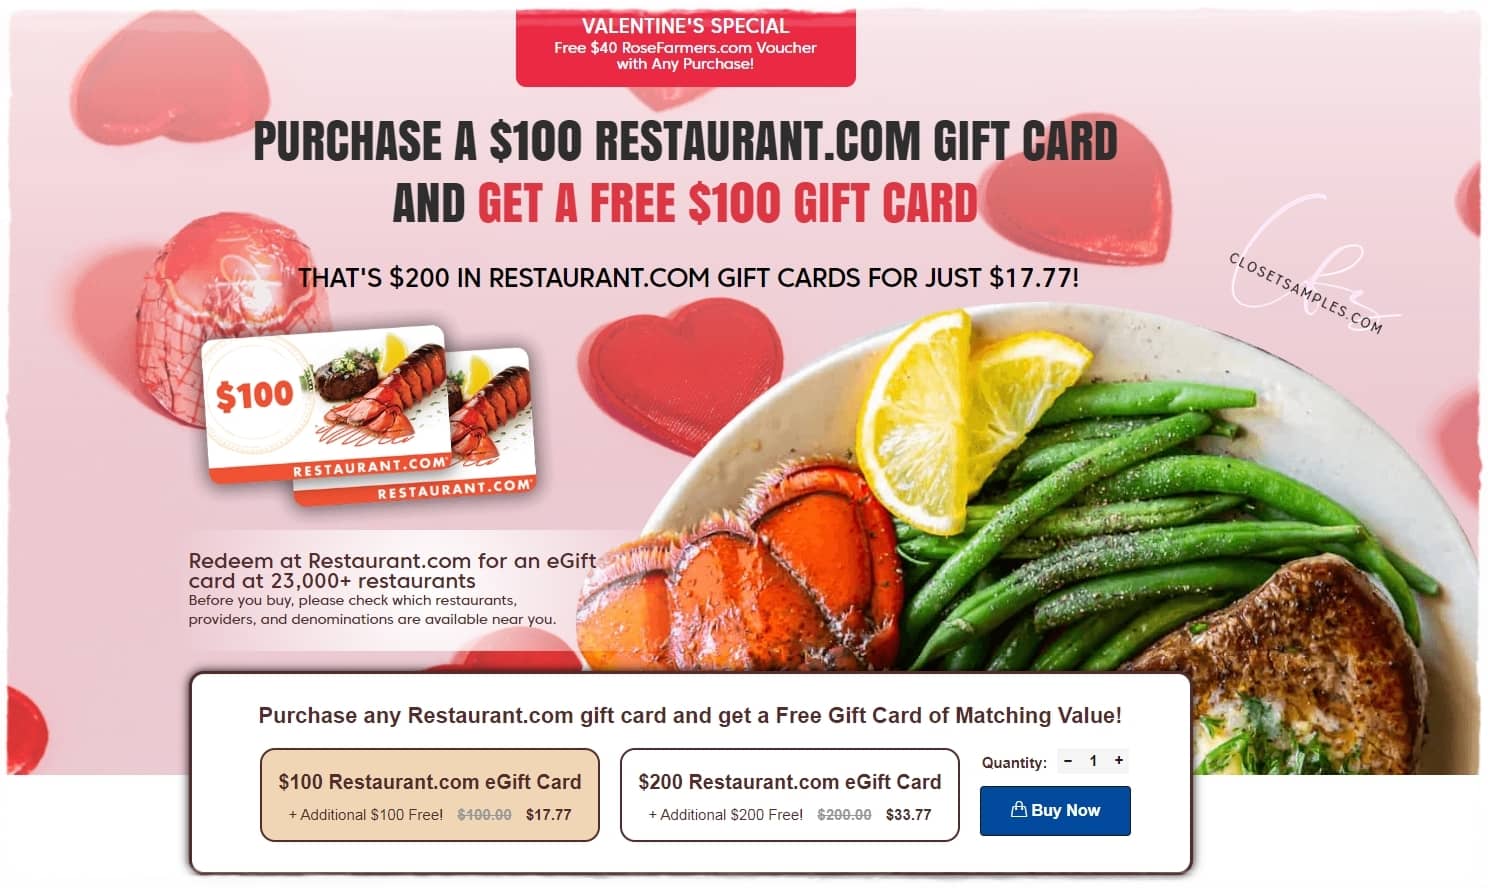 Get $200 in Restaurant.com Gift Cards for Just $17.77!